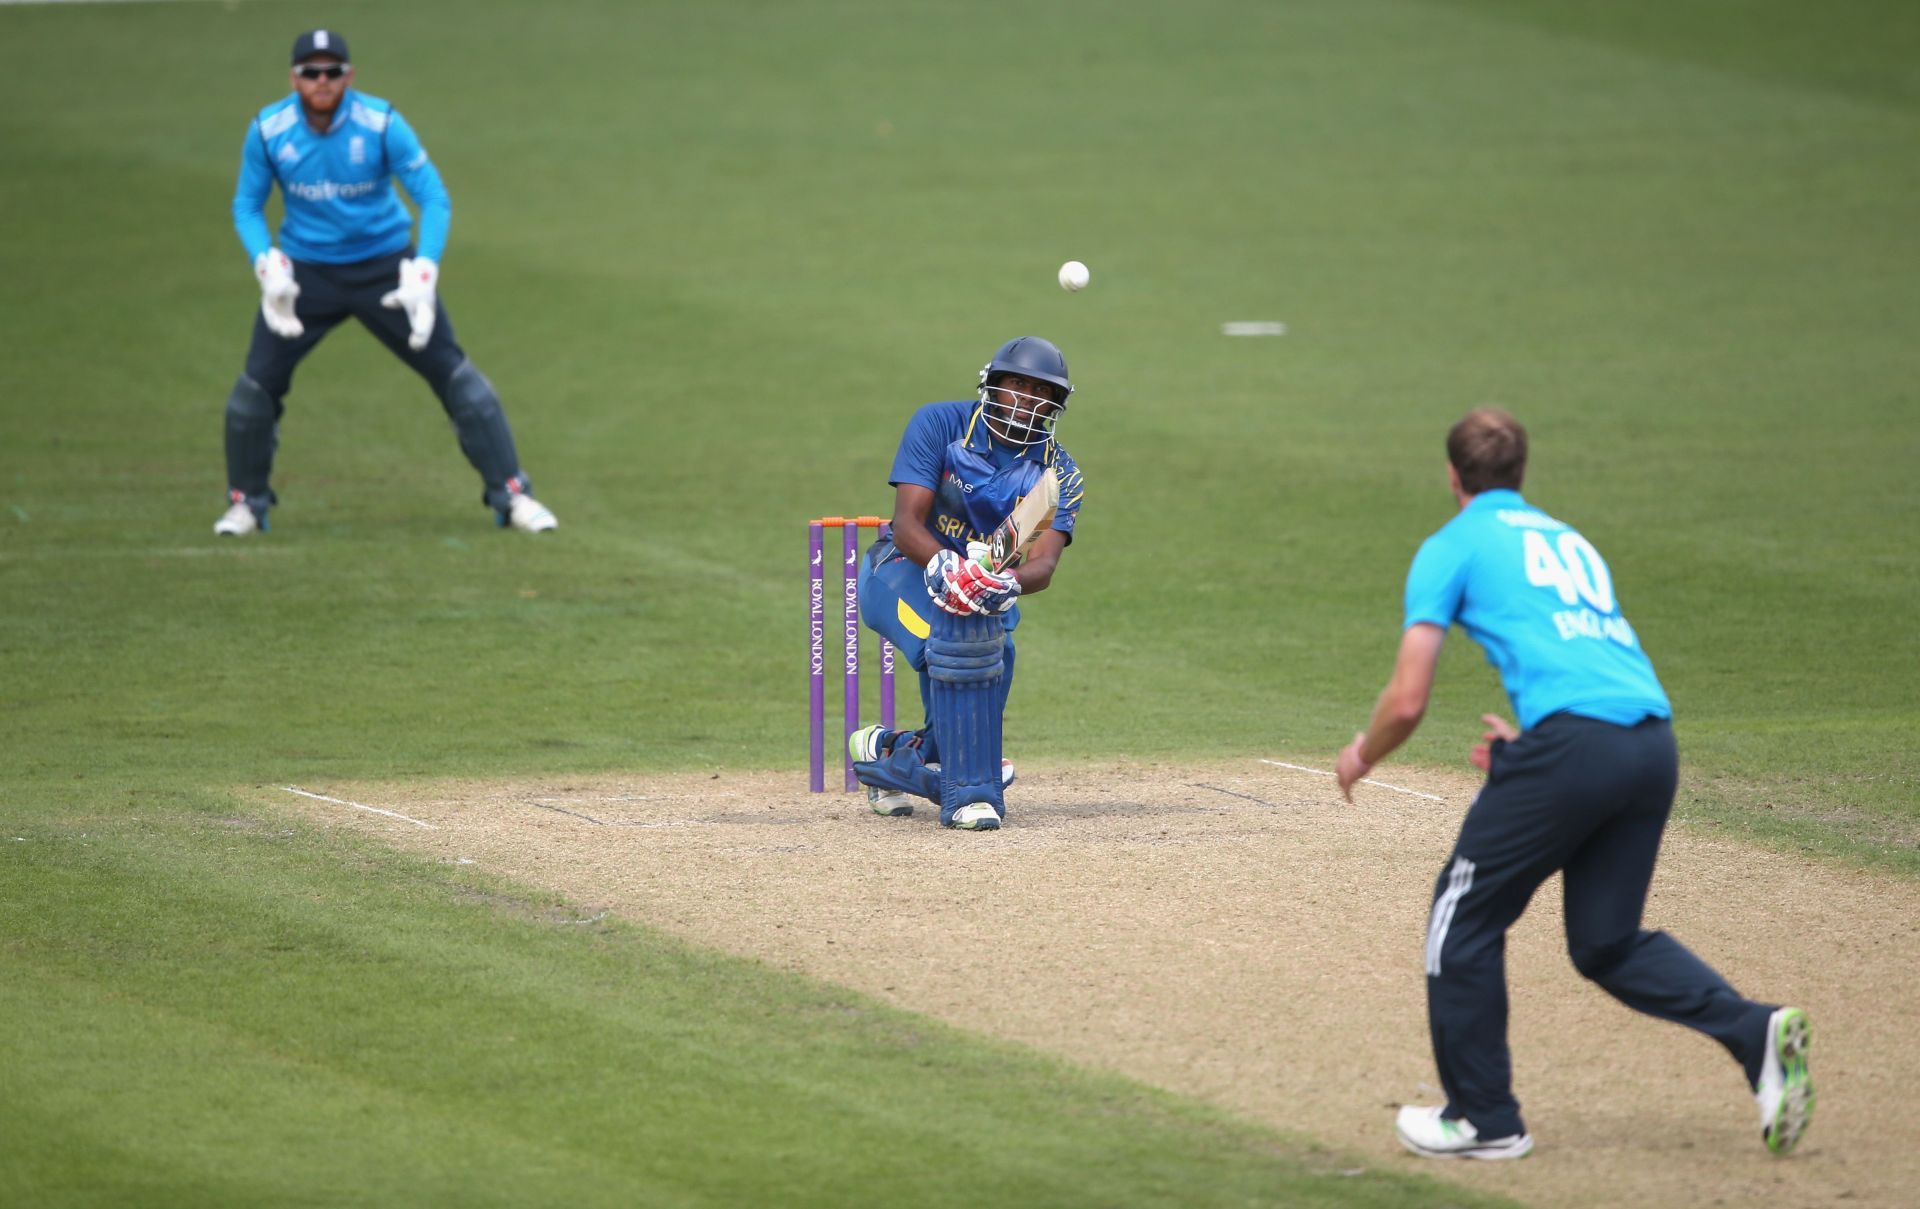 Bhanuka Rajapaksa batting in a match against the England Lions